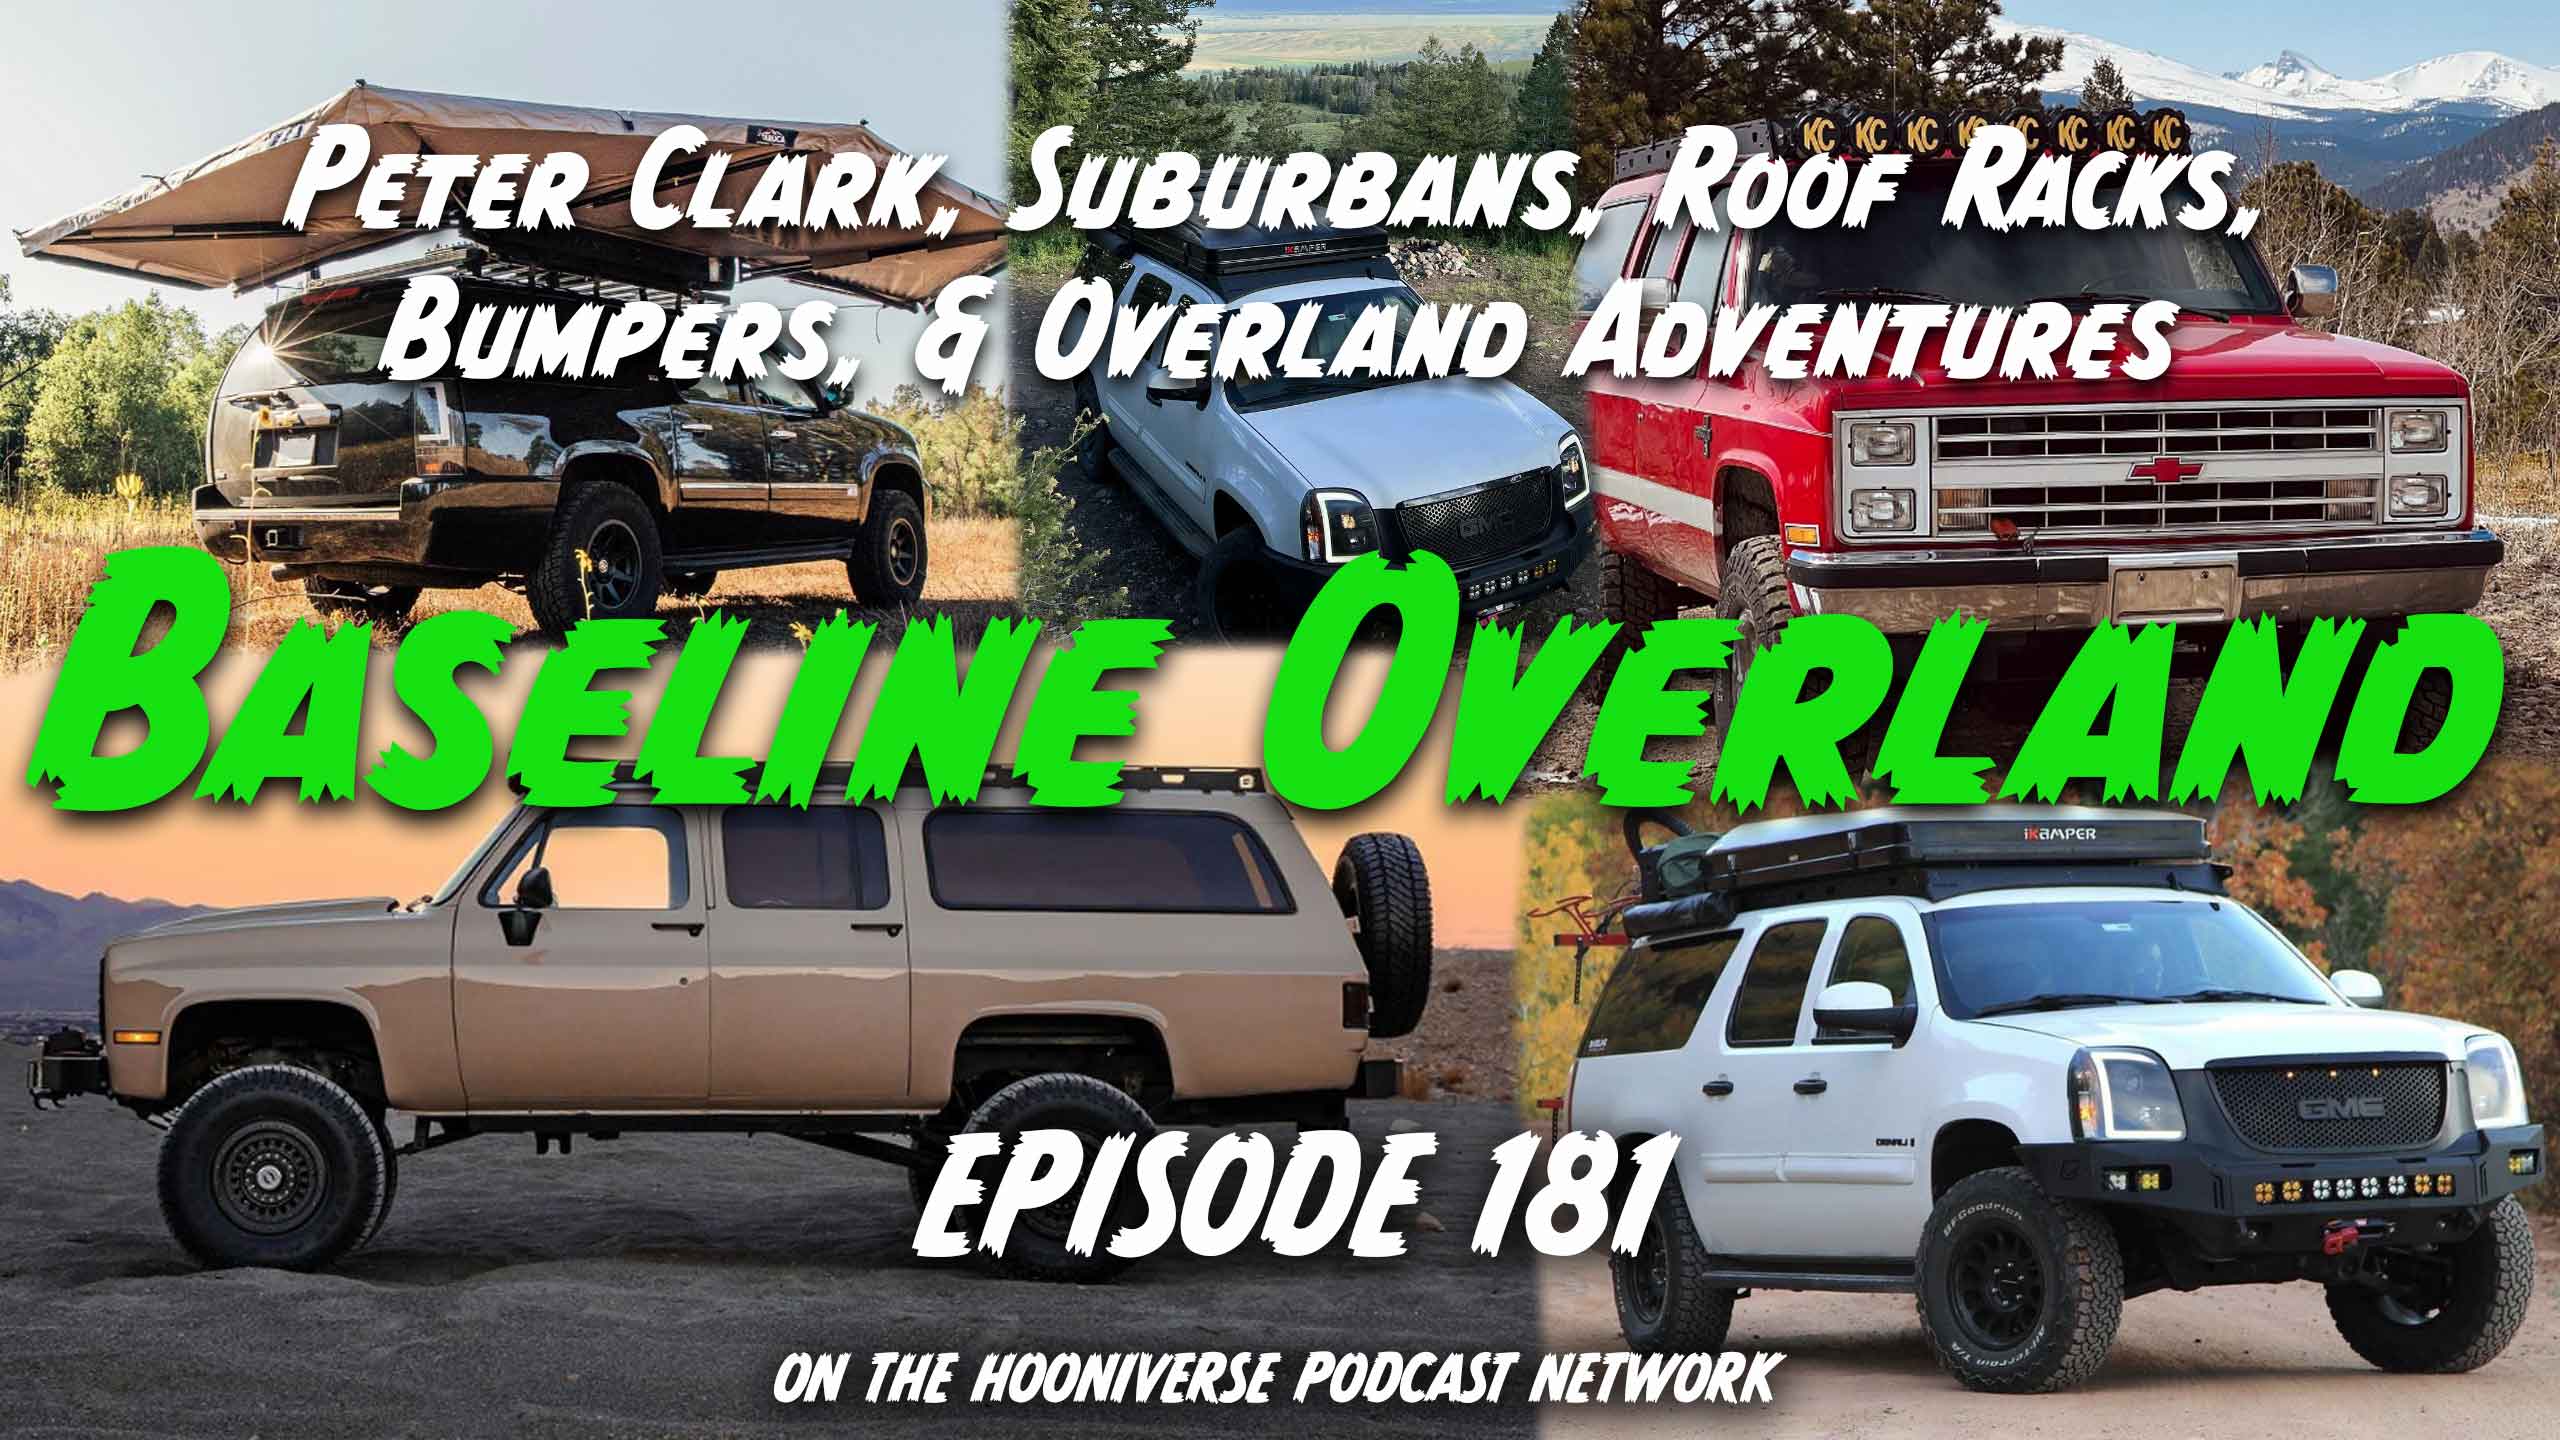 Peter-Clark-Baseline-Overland-Suburban-Off-The-Road-Again-Podcast-Episode-181